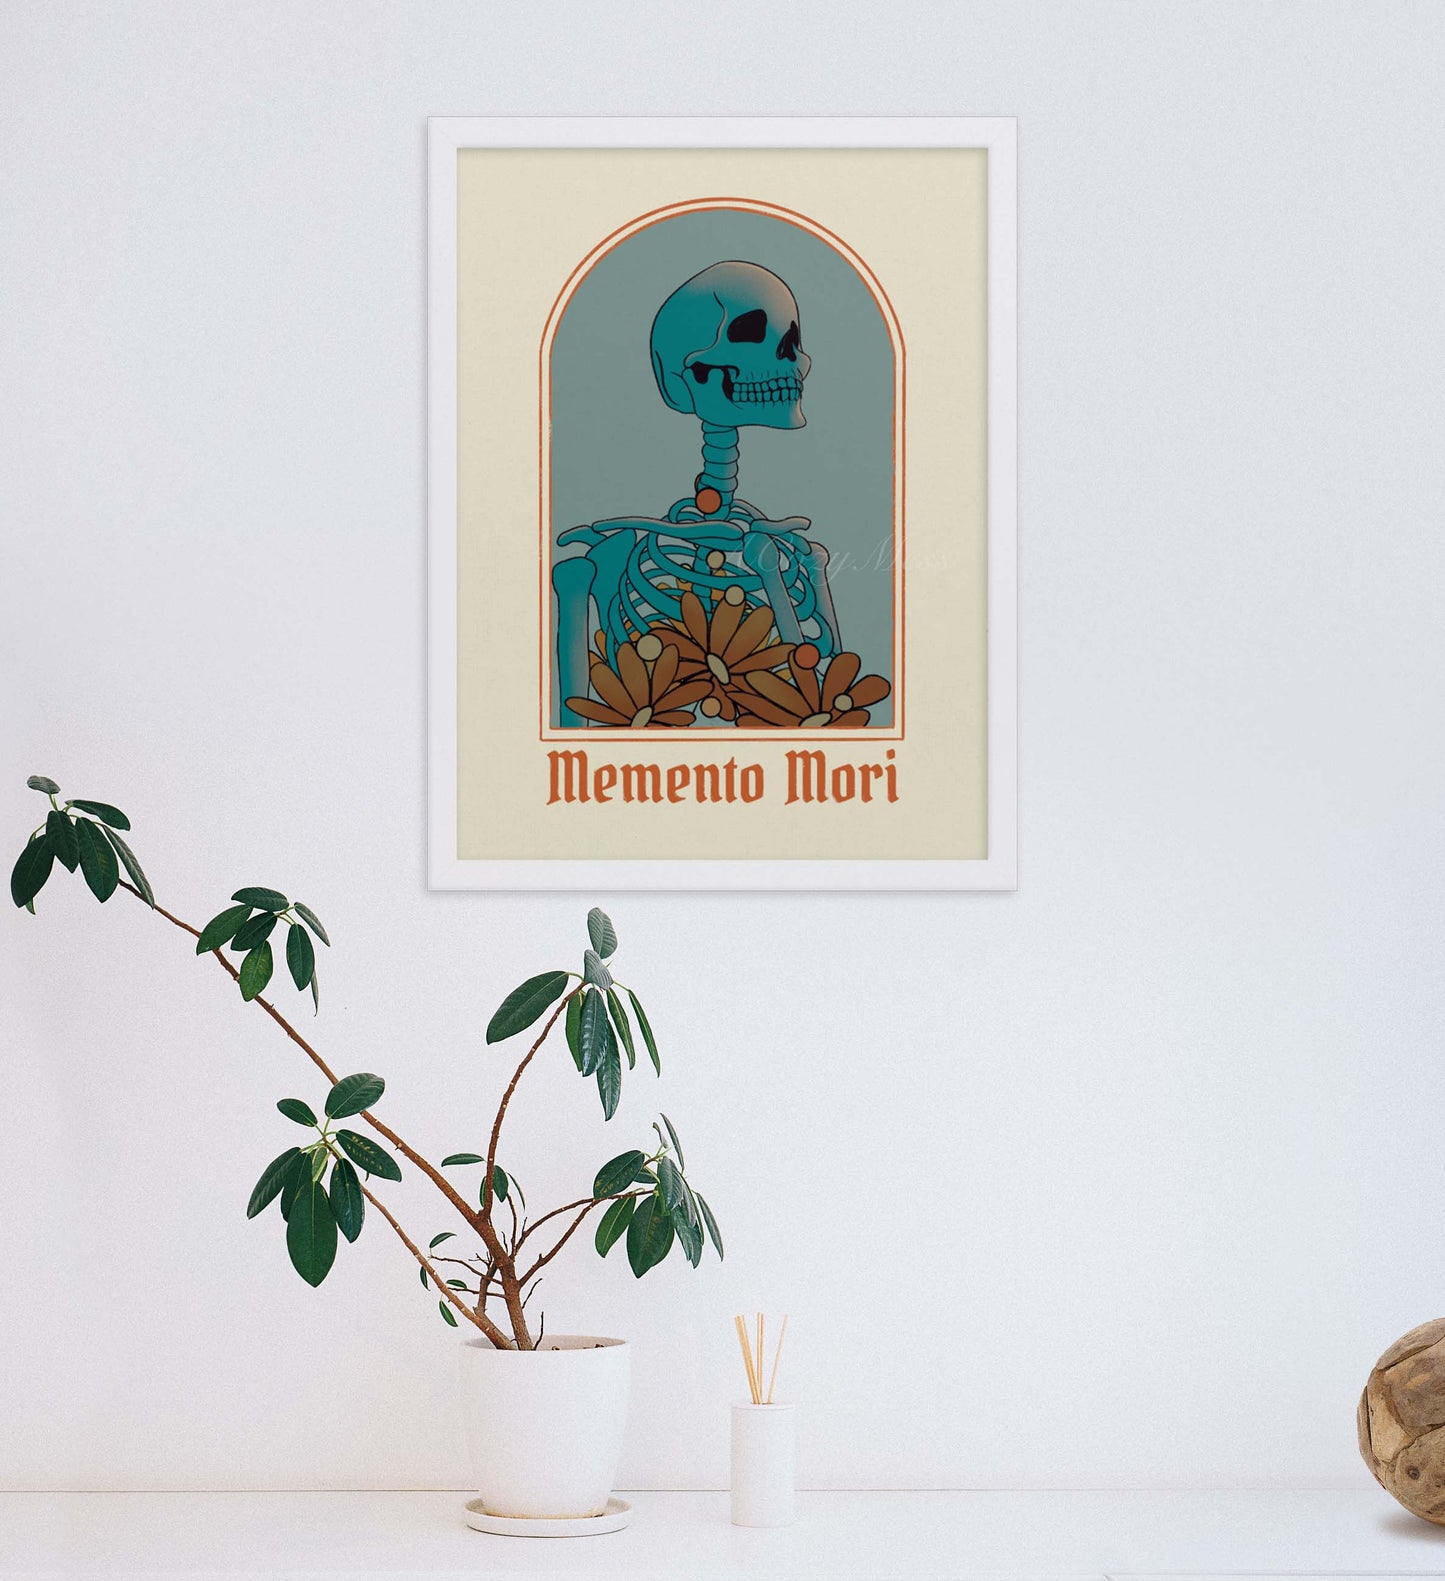 An art poster featuring a striking skeleton illustration with the words 'Memento Mori,' inviting reflection on mortality and the transient nature of life in blue, beige & orange hues. The poster is framed in white frame.